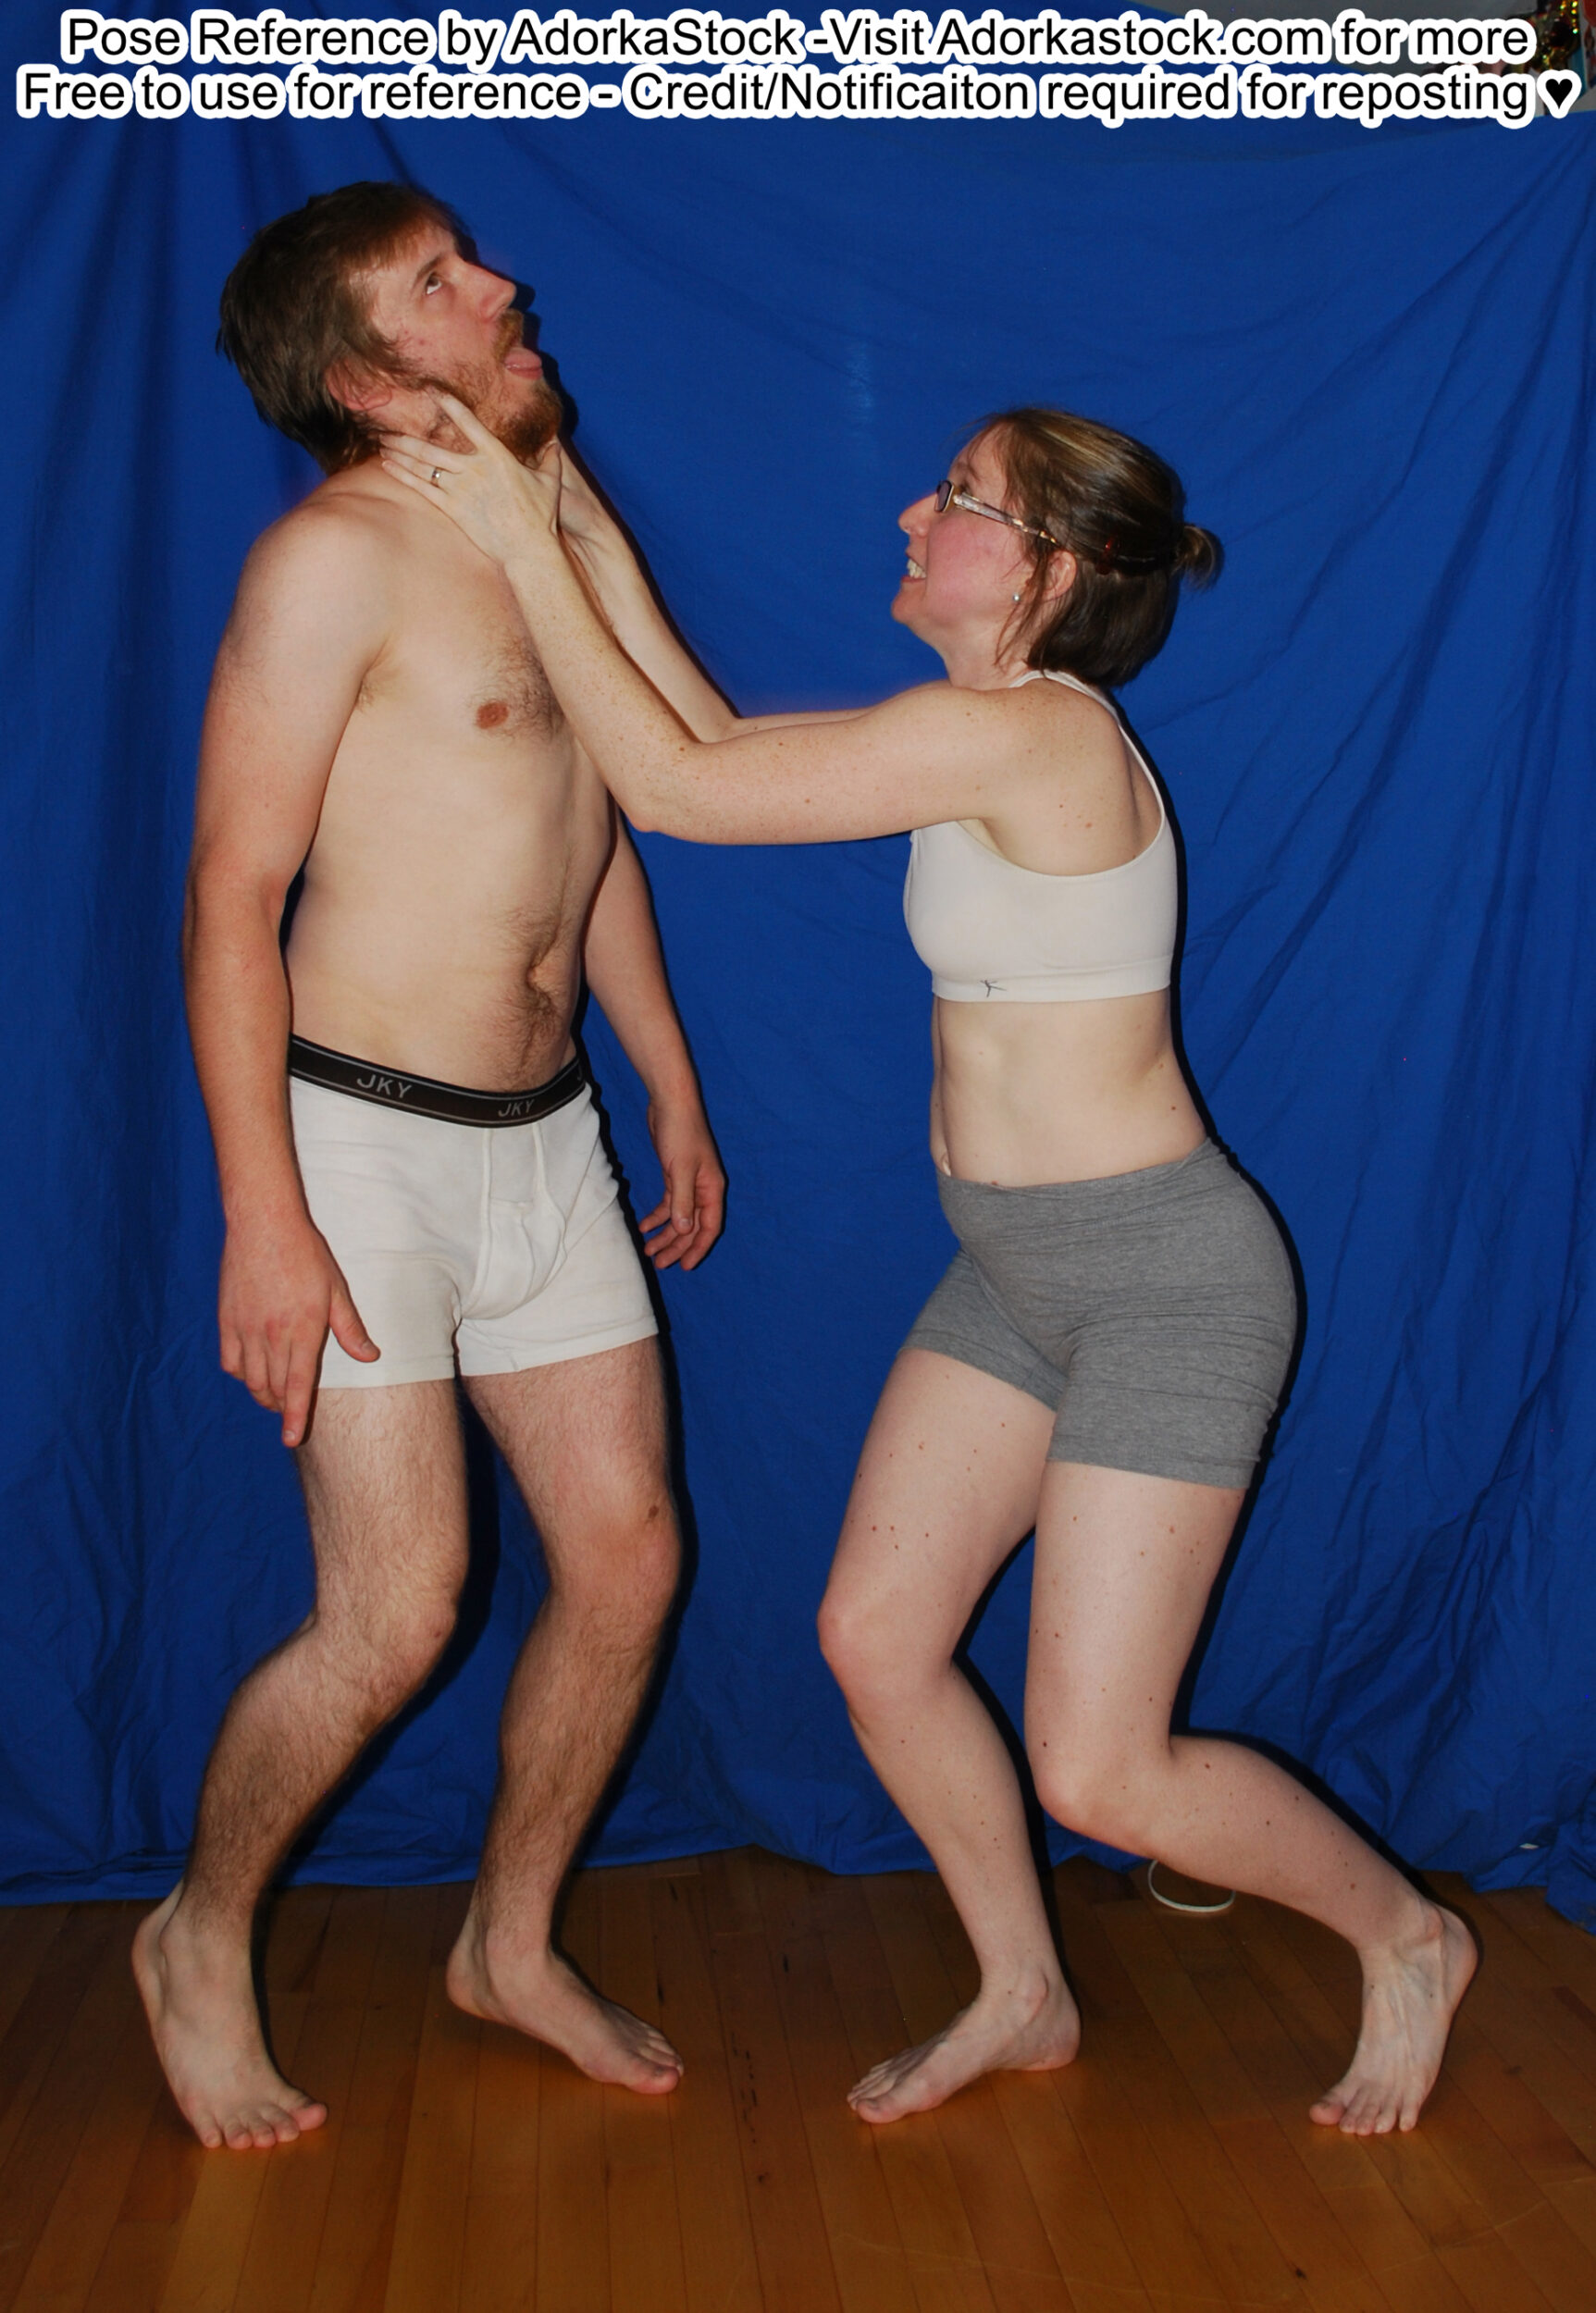 Thin, white, female pose reference model in standing profile pose with her hands around the neck of a taller, male model who looks like he's being choked.